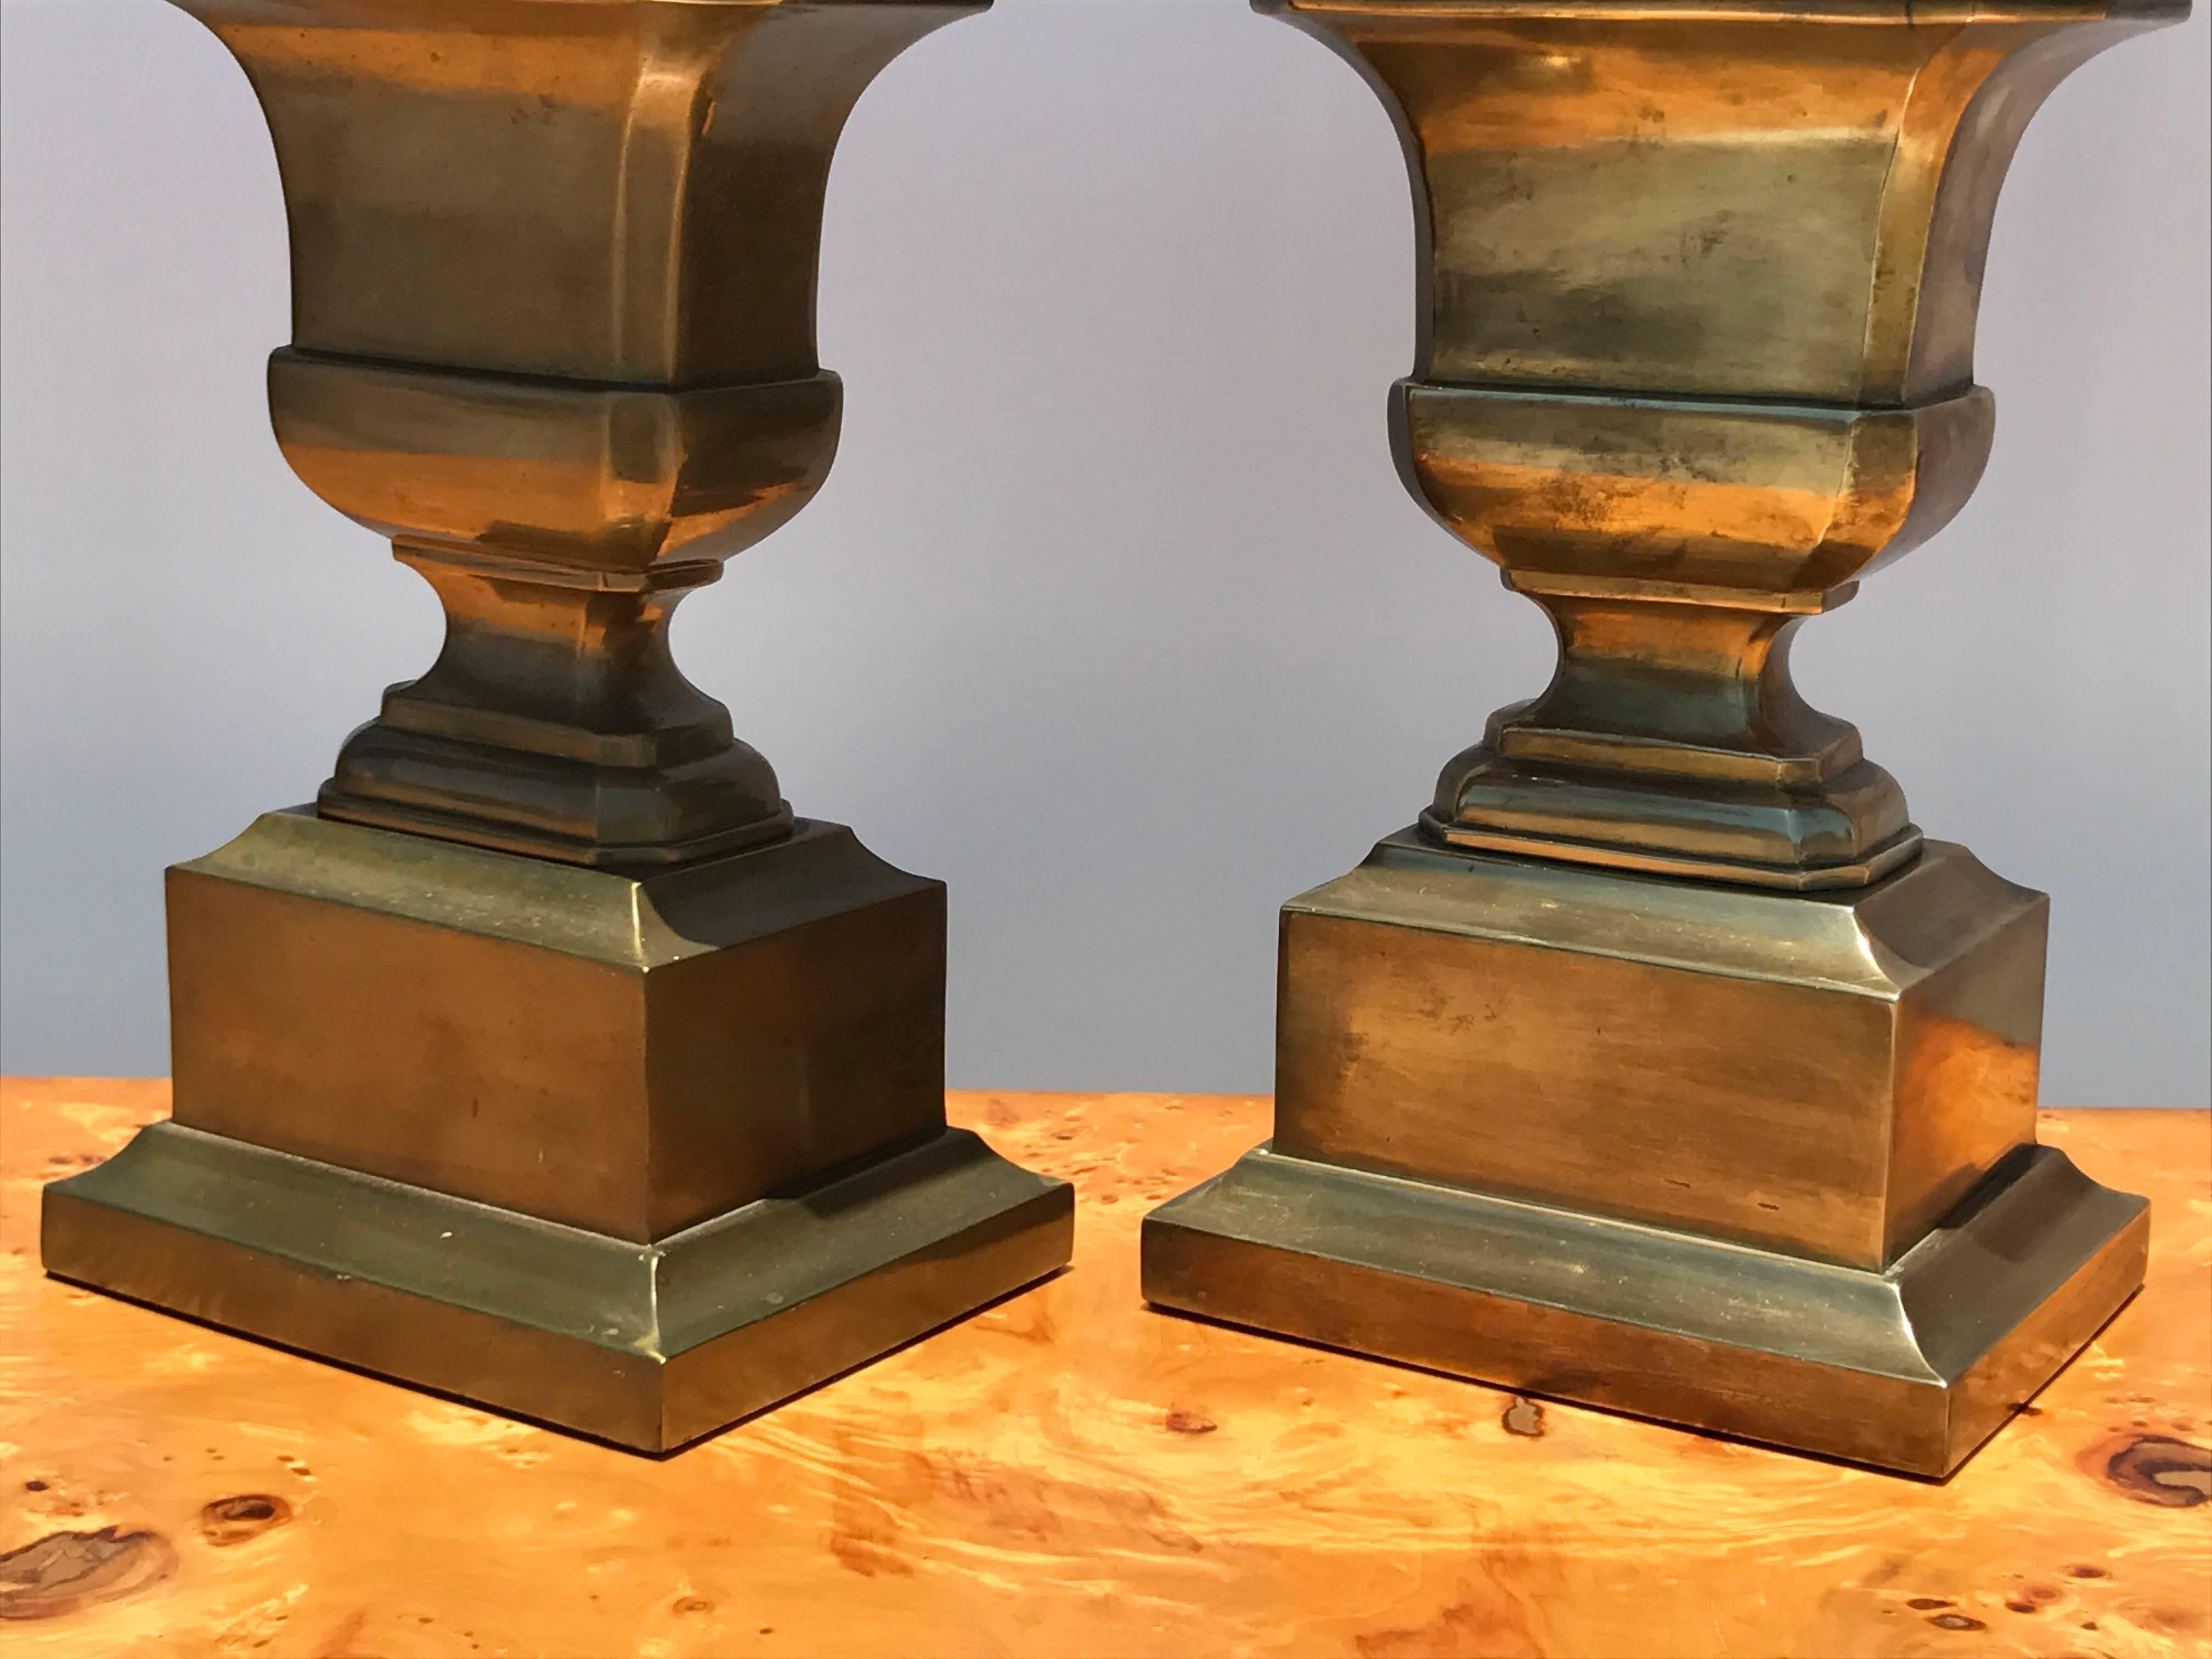 20th Century Pair of Neoclassical Urn Patinated Brass Lamps